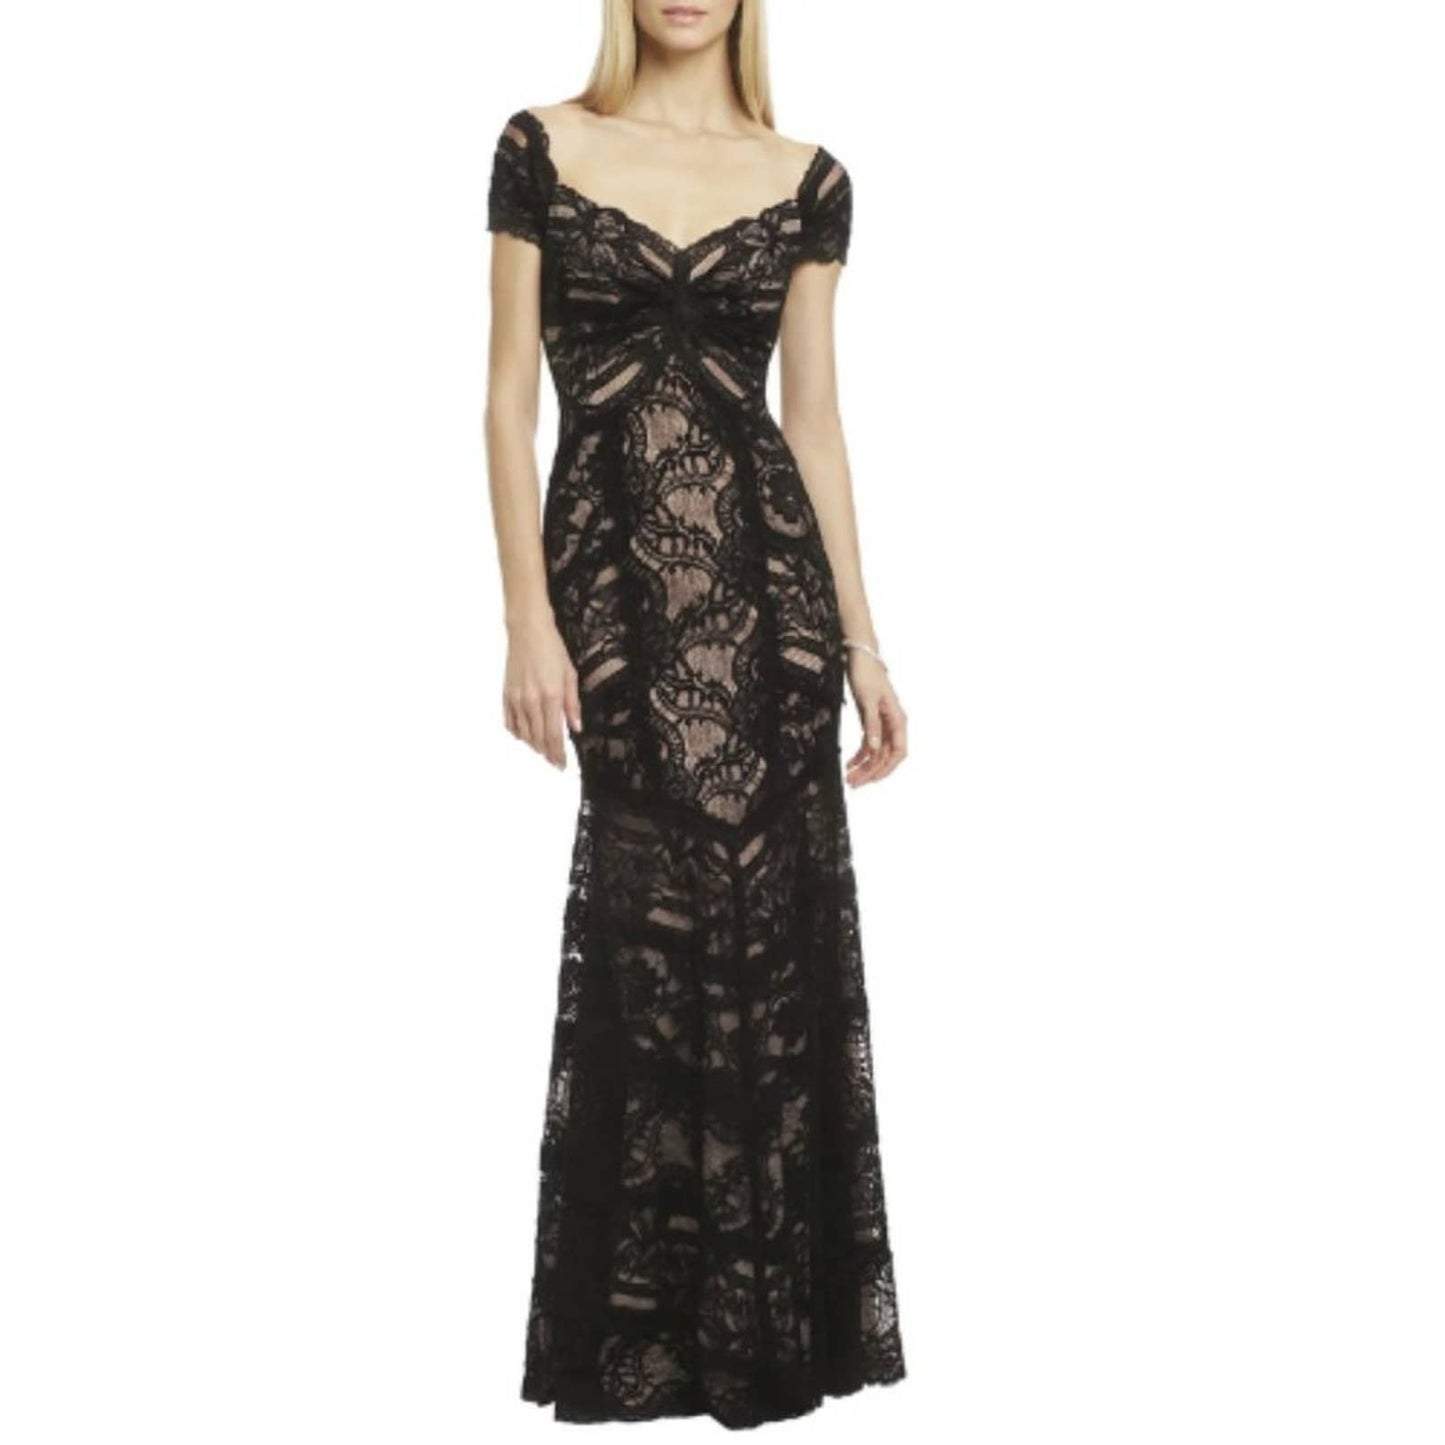 Nicole Miller Tempted by You Gown in Black and Nude Size 8